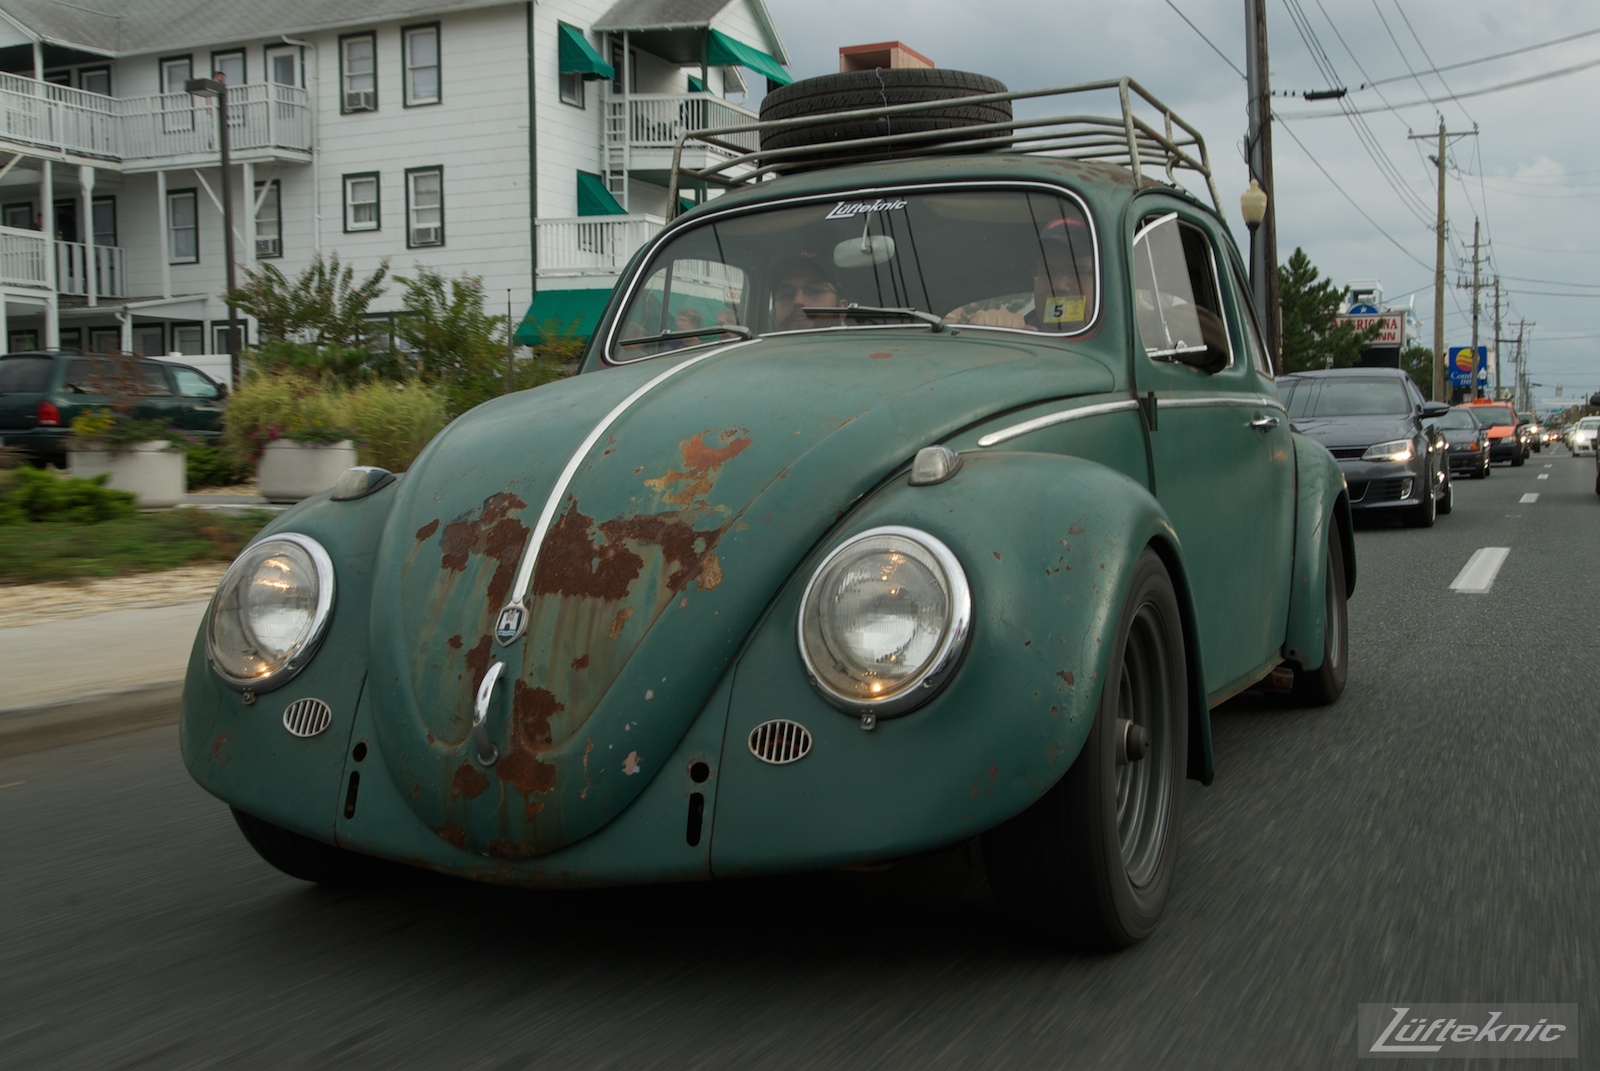 All original green 1960 Beetle with a Porsche 356 engine and brakes.